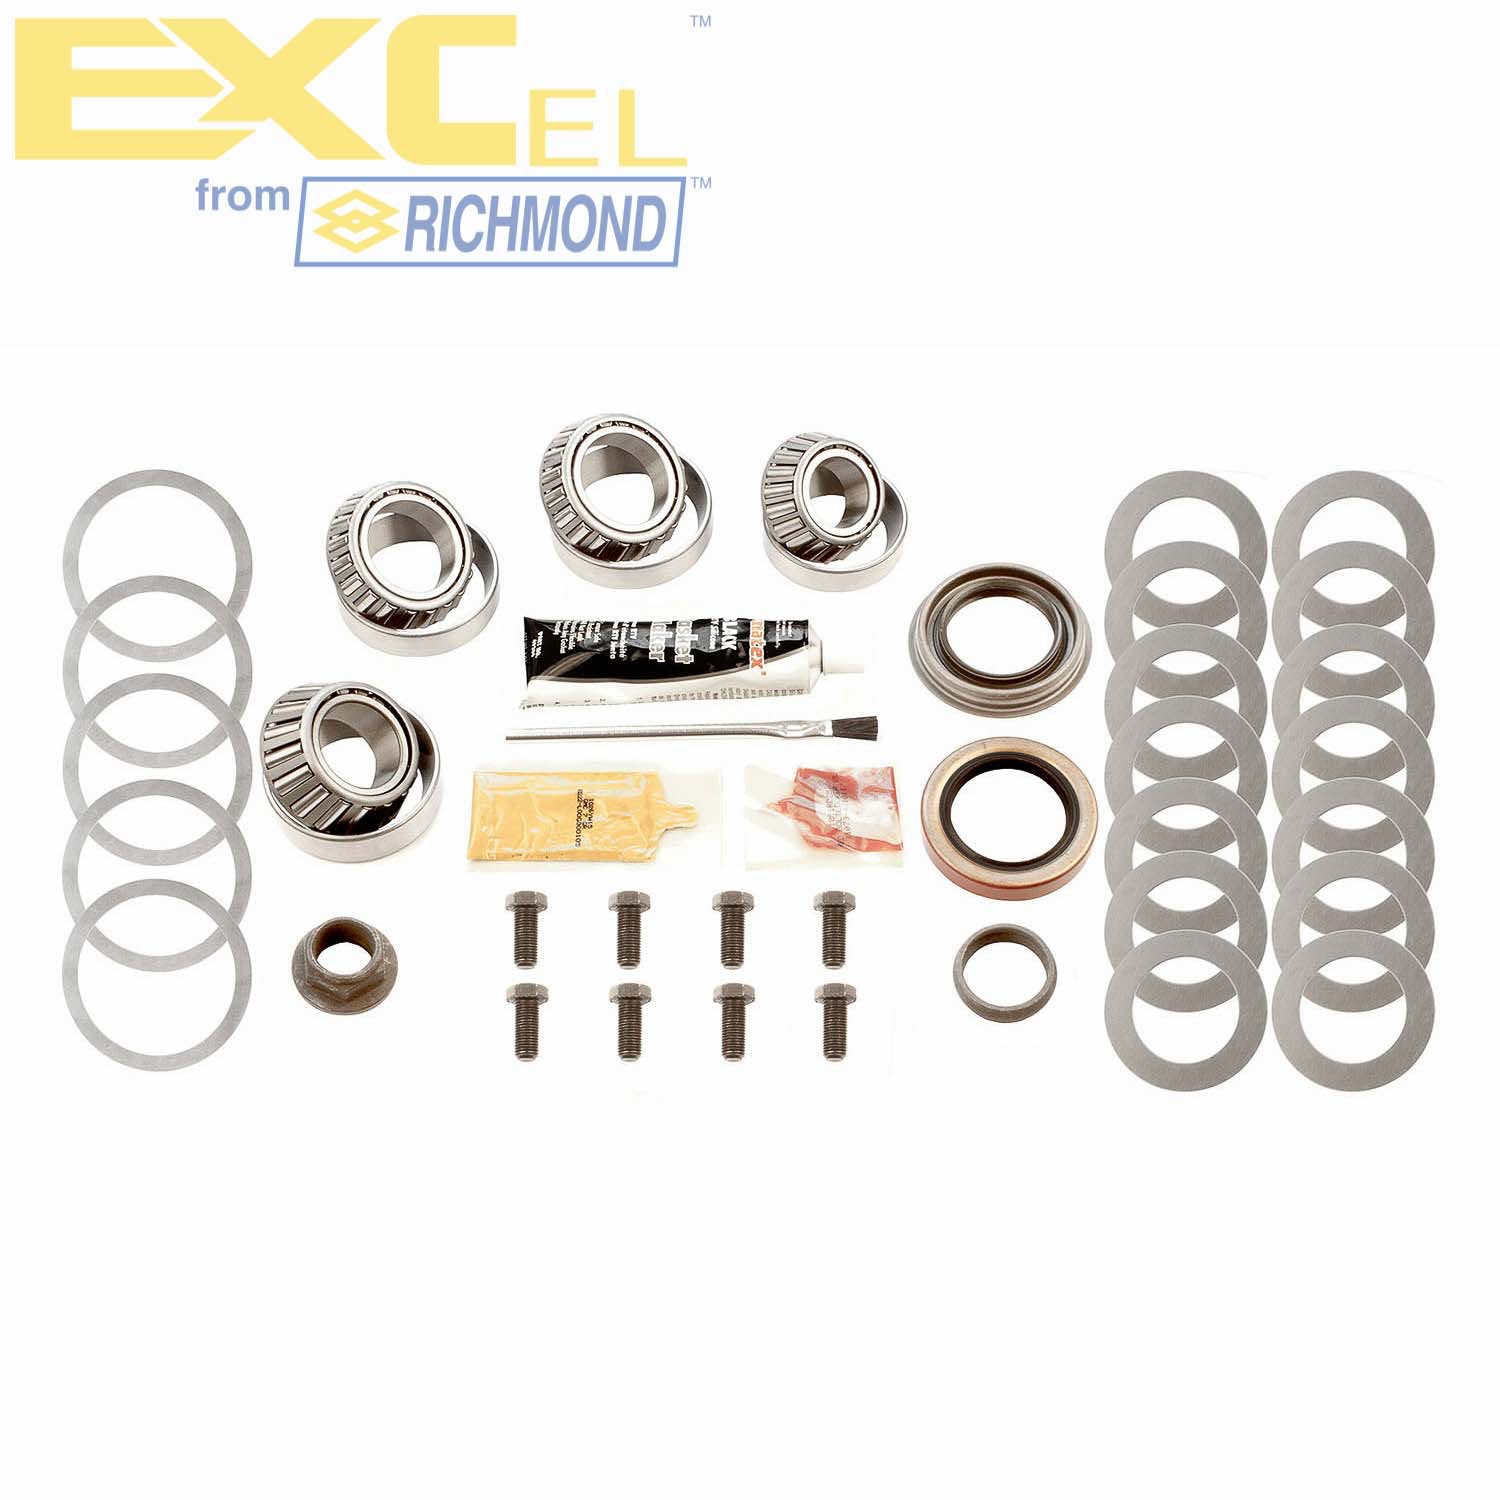 Excel XL-1062-1 Differential Bearing Kit